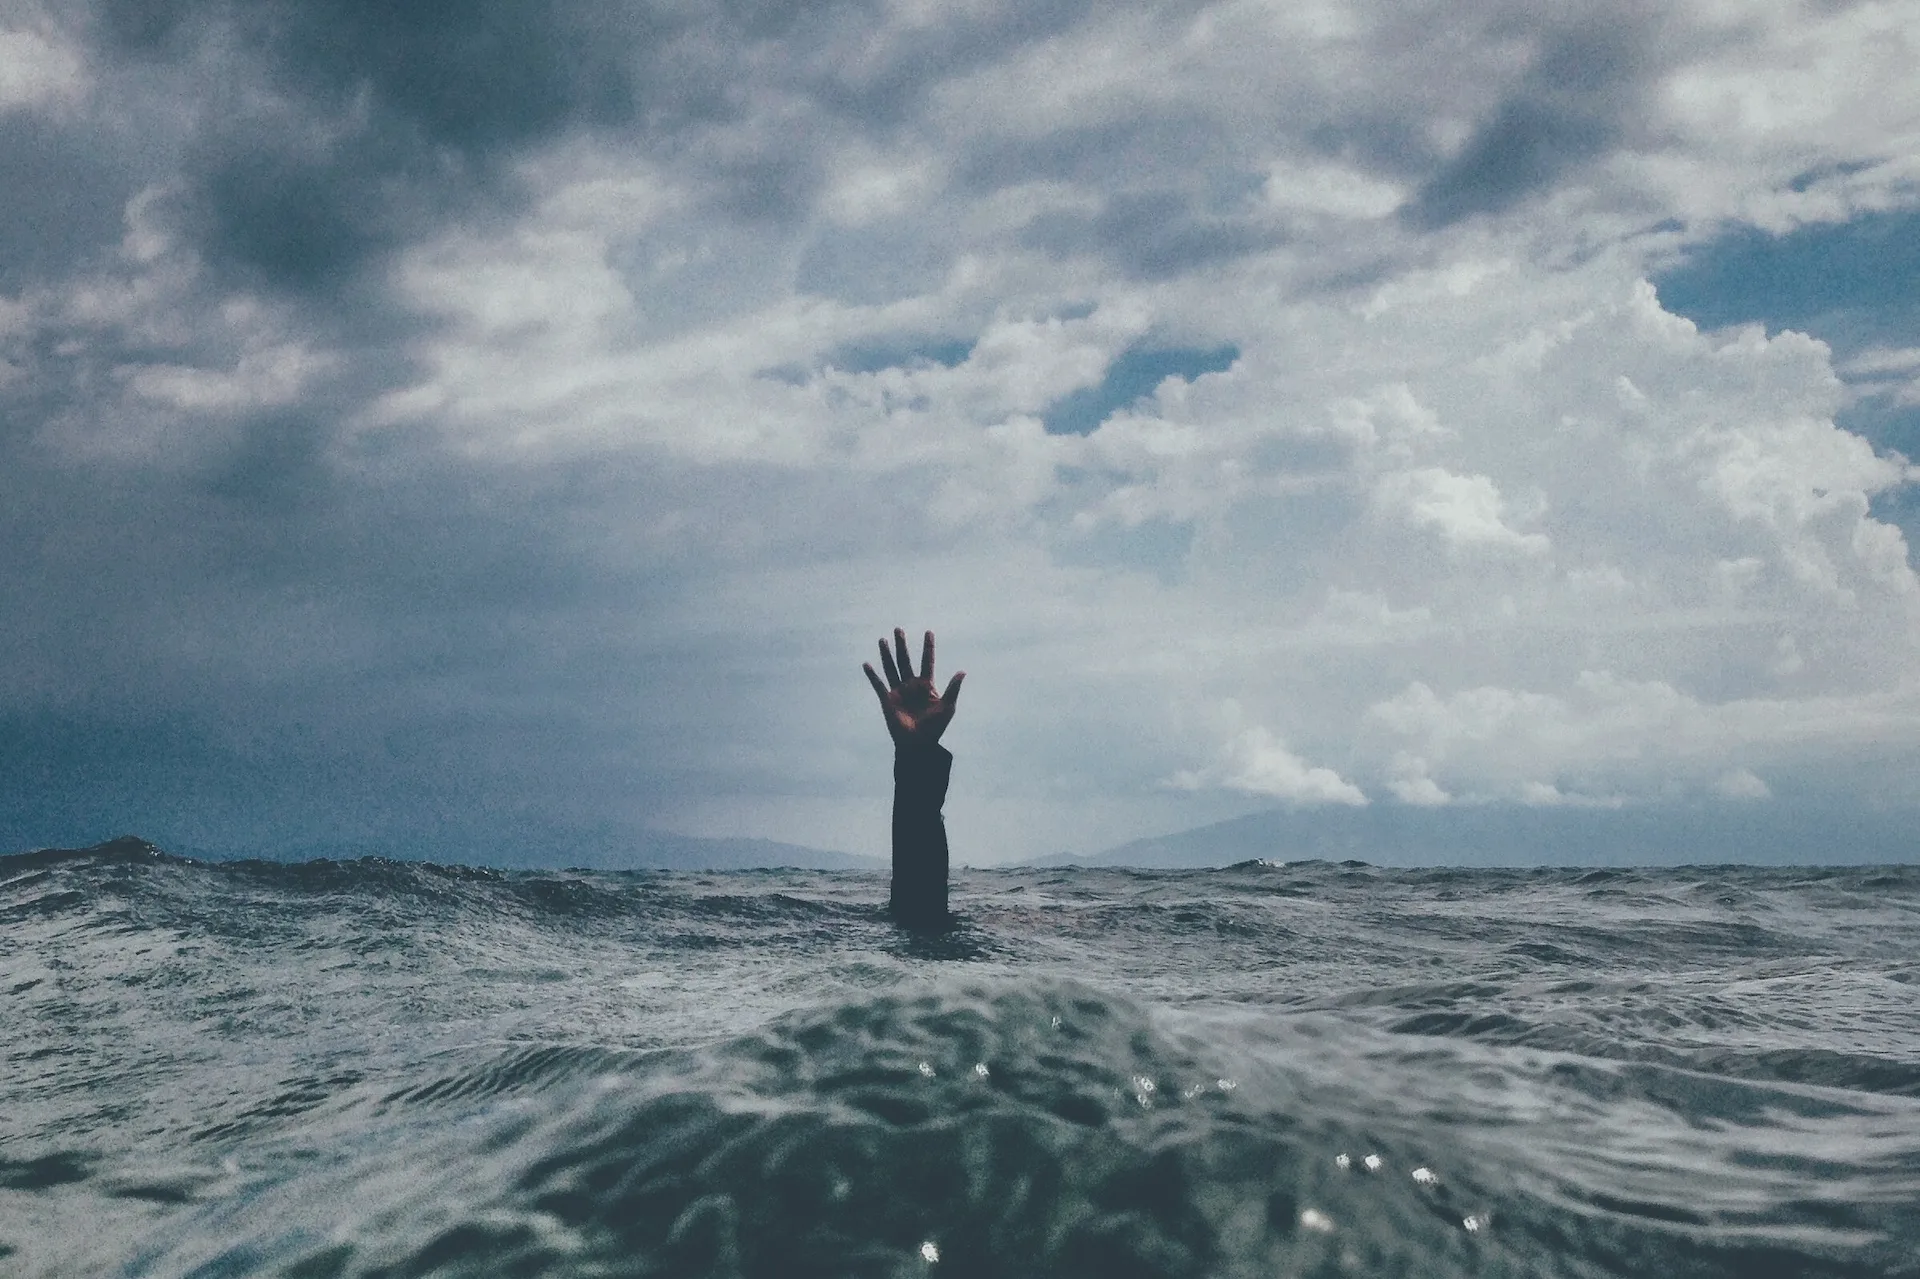 Stress. The feeling of drowning